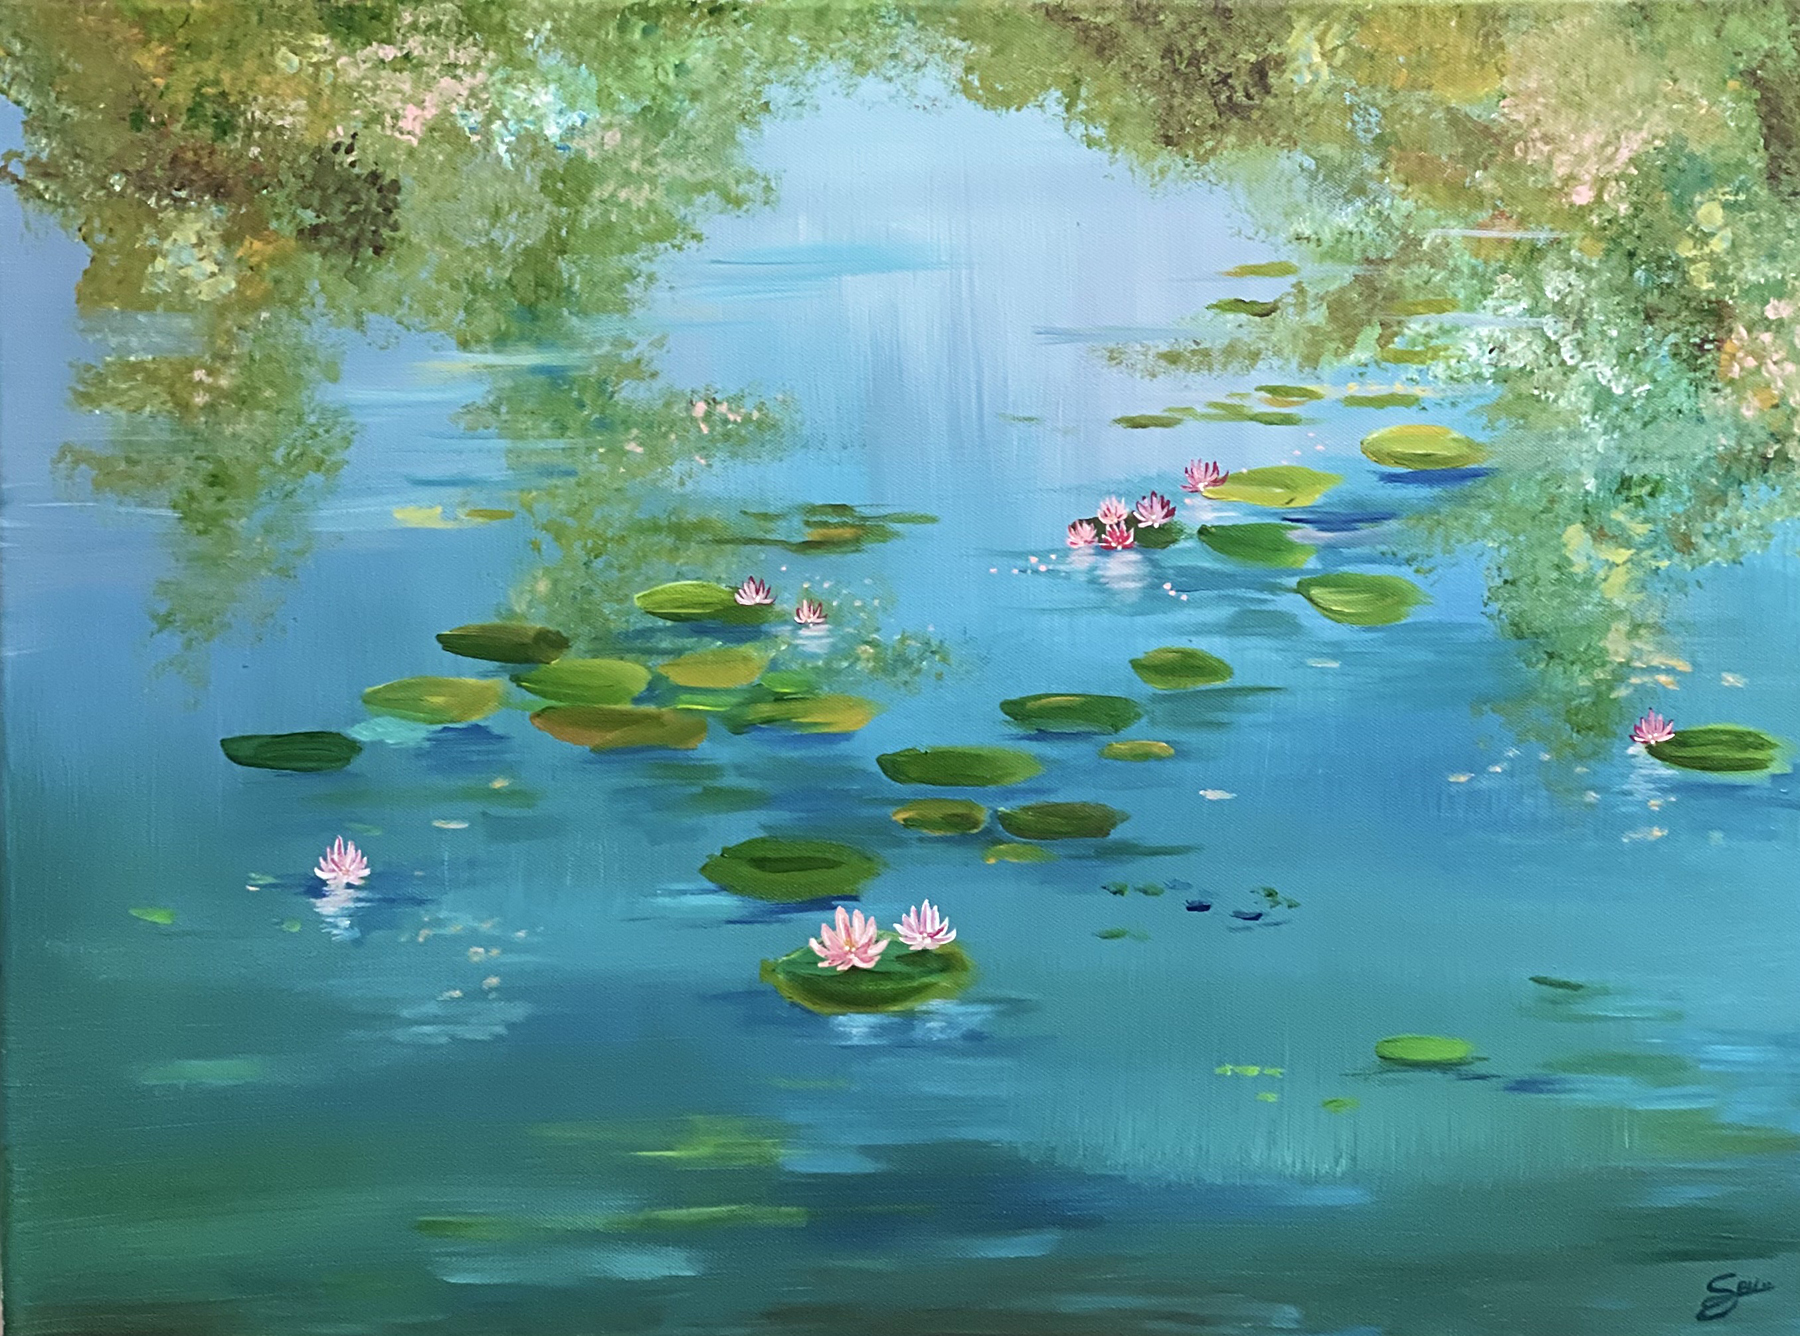 Brilliant green lily pads and pink lotus flowers float in a cerulean pond